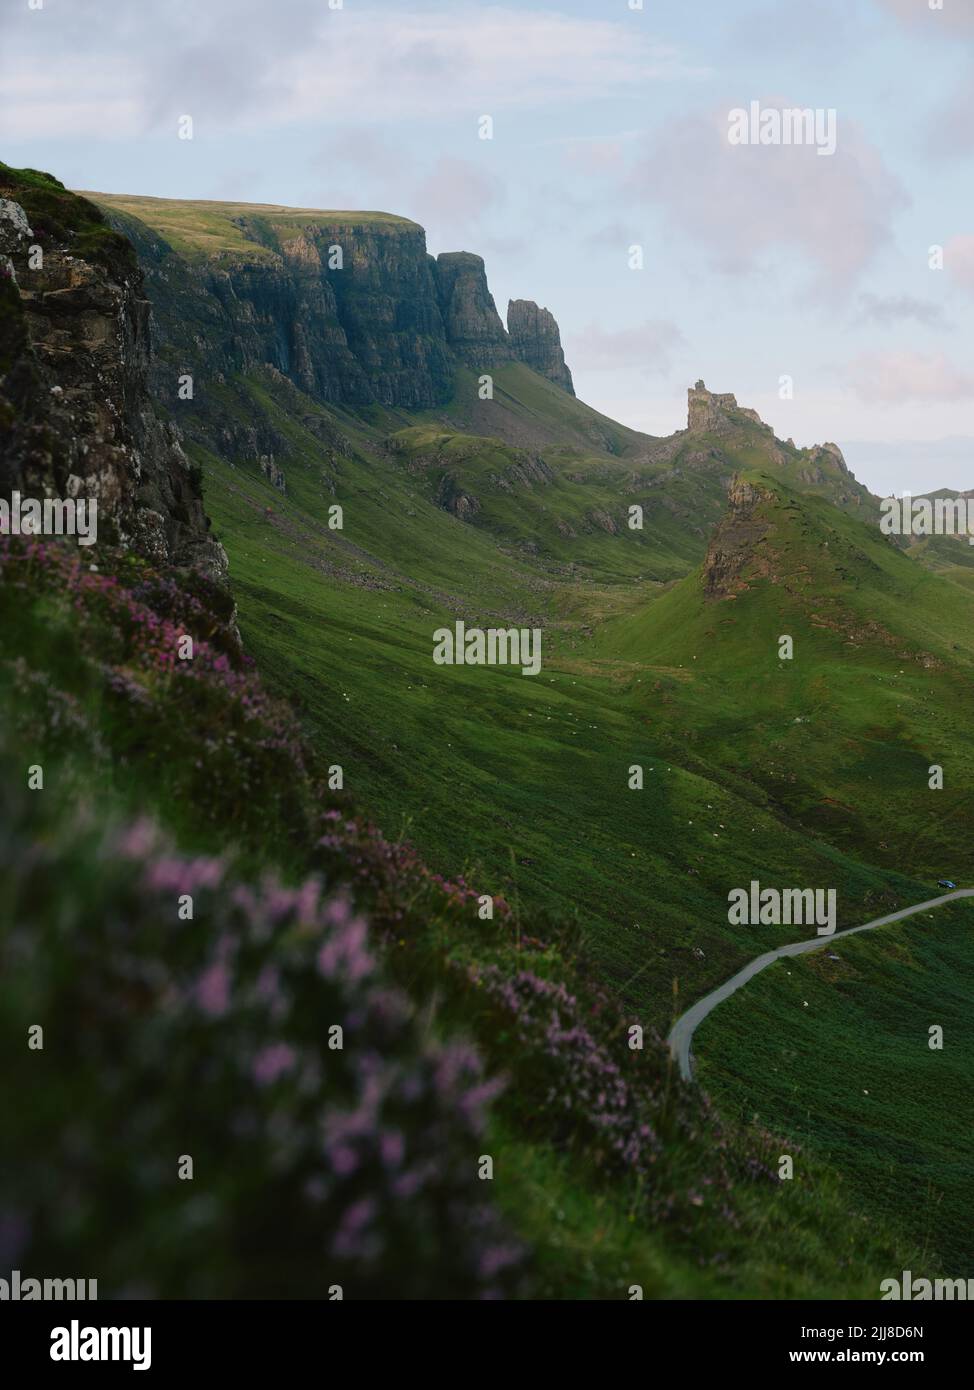 The Quiraing landslip, eastern face of Meall na Suiramach, northernmost summit of the Trotternish Ridge, Isle of Skye, Scotland - summer landscape Stock Photo